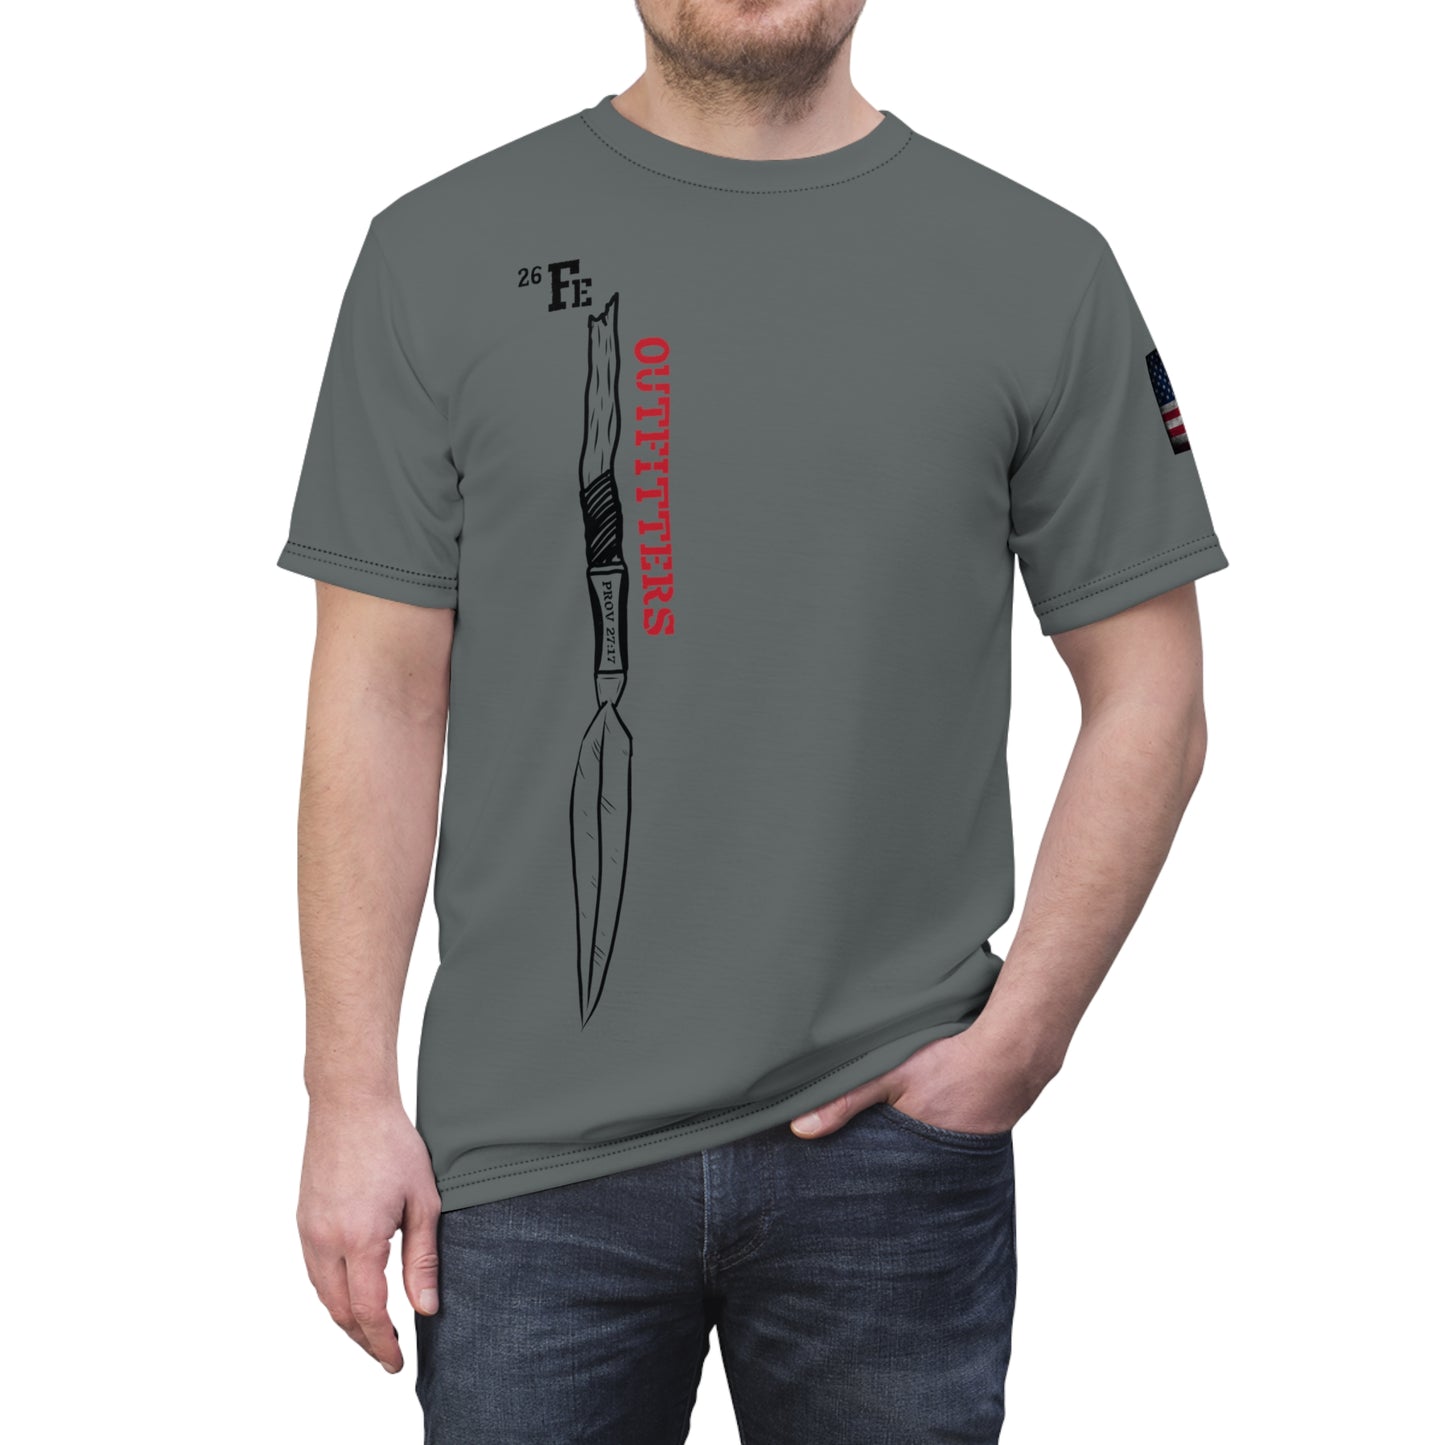 Iron Spear Outfitters t shirt